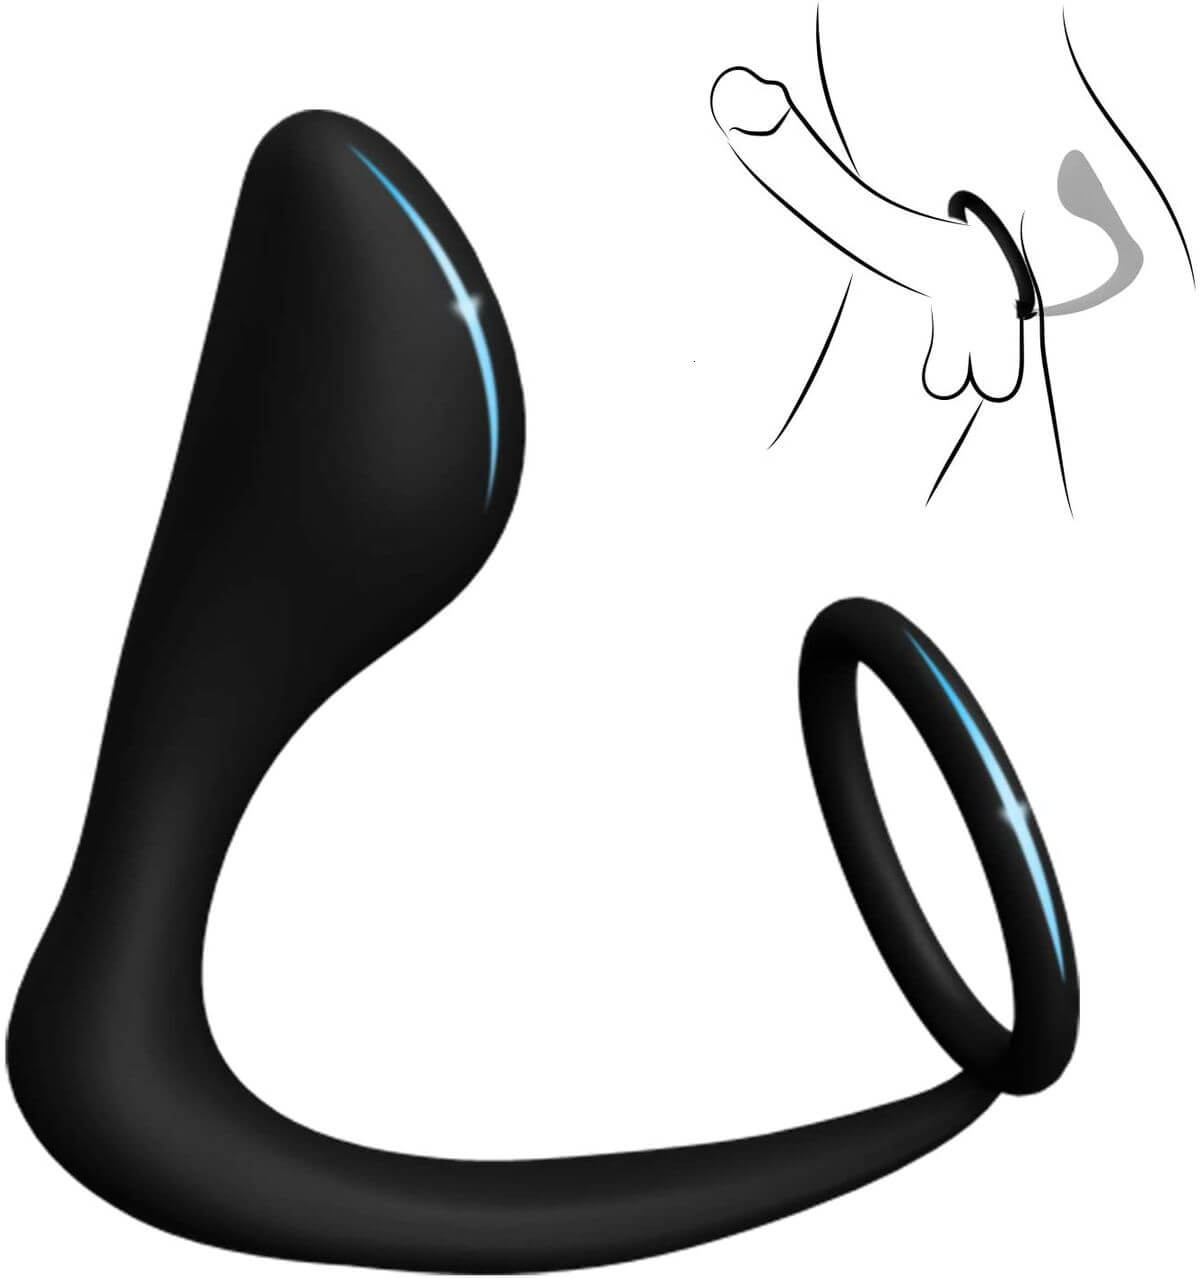 2In1 Anal Plug With Penis Ring For Enhancing Ejaculating Cock Ring